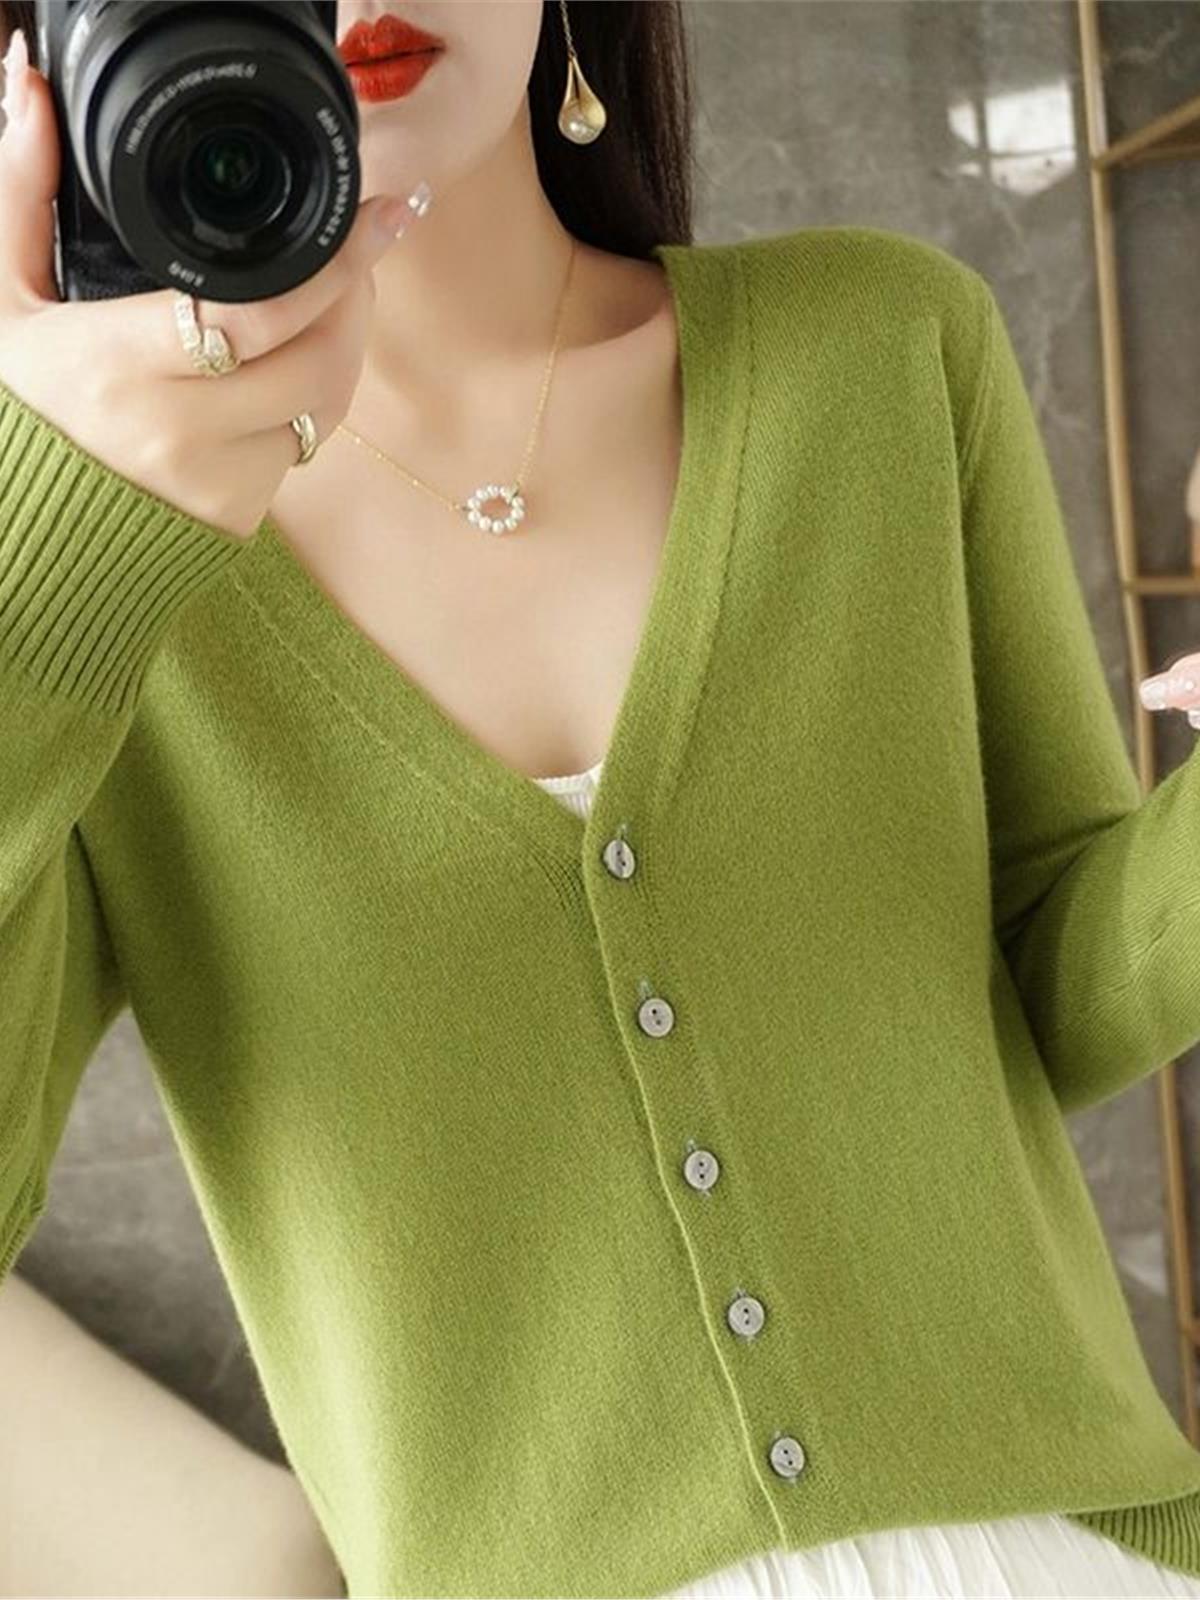 Knitted sweater women's autumn winter line jacket outerwear knit sweater green black thin cardigan green outer